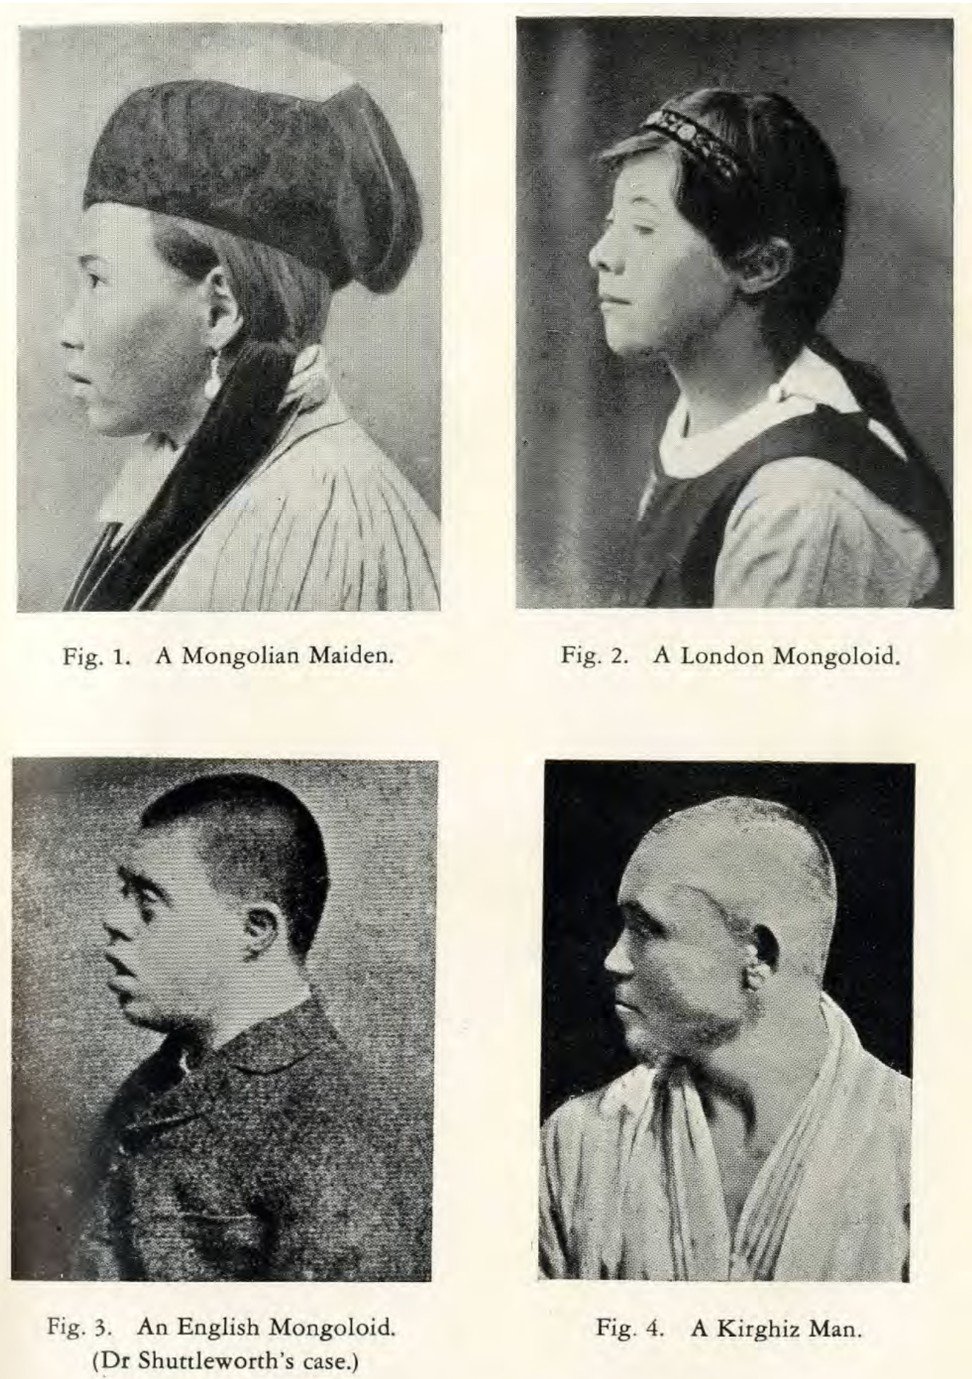 In the late 18th century, all the peoples of the East were lumped together into an explicitly racial category, called the Mongolian. Photo: Handout